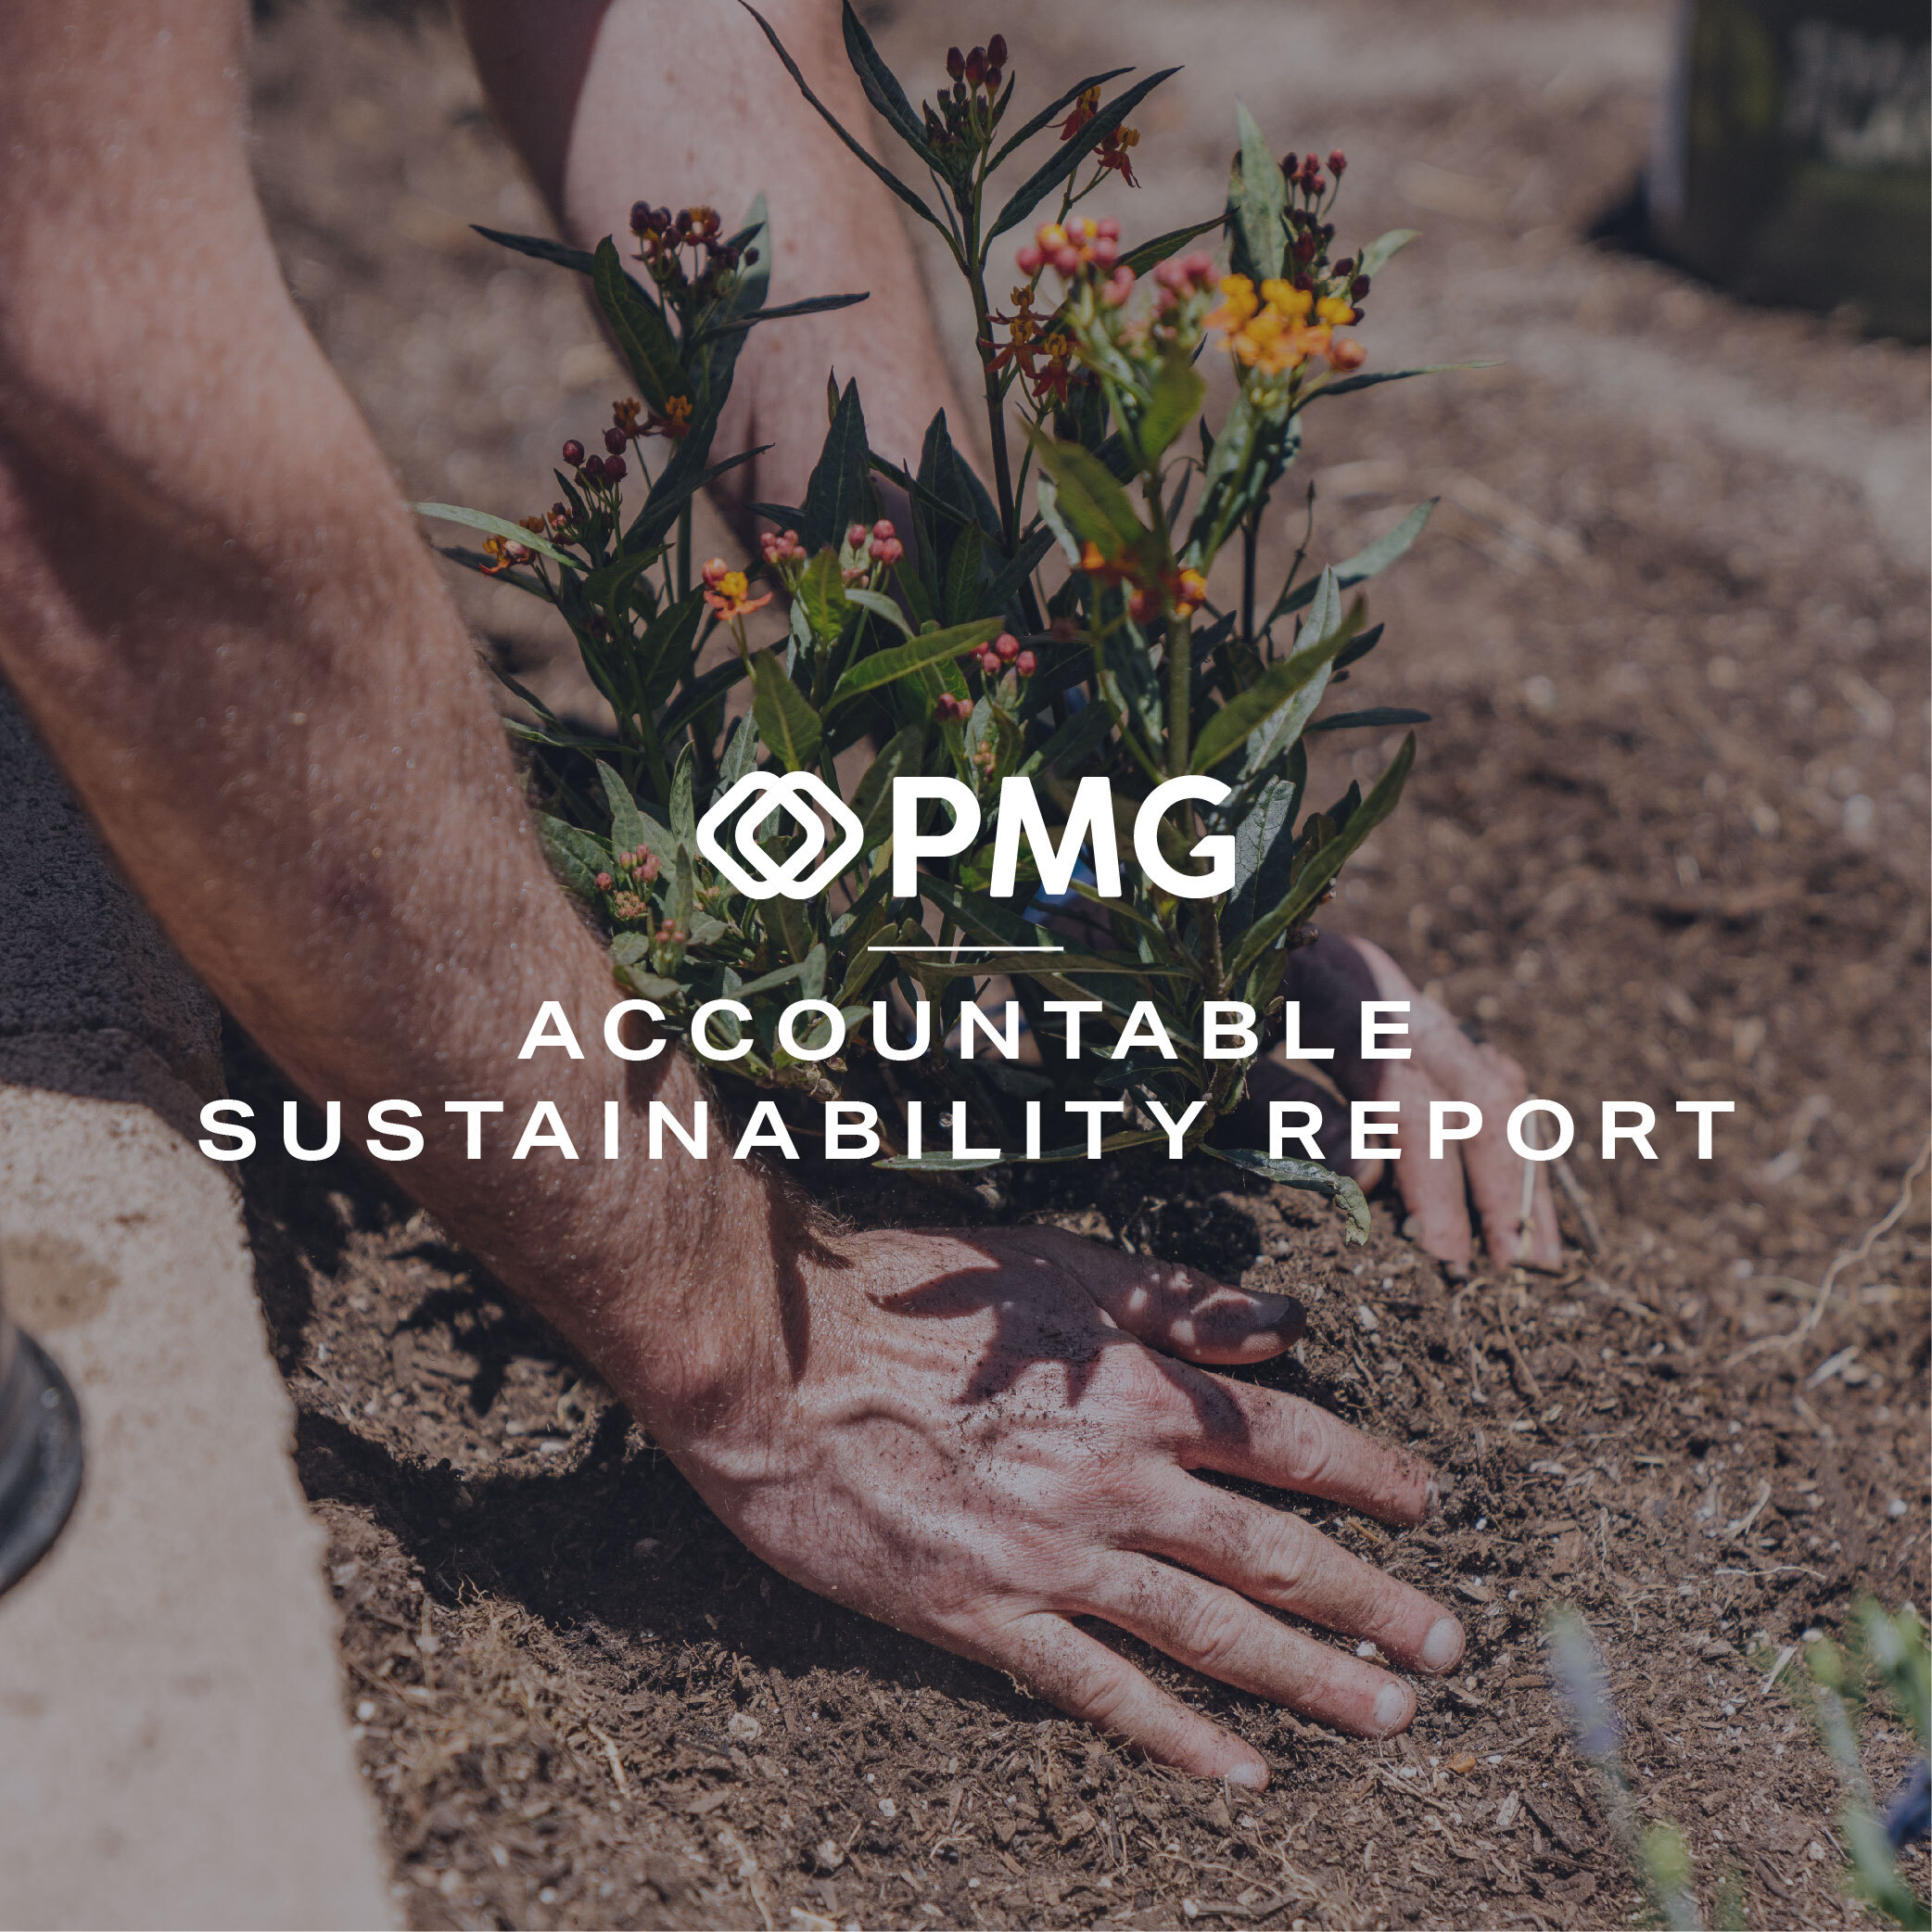 PMG Releases First Accountable Sustainability Report